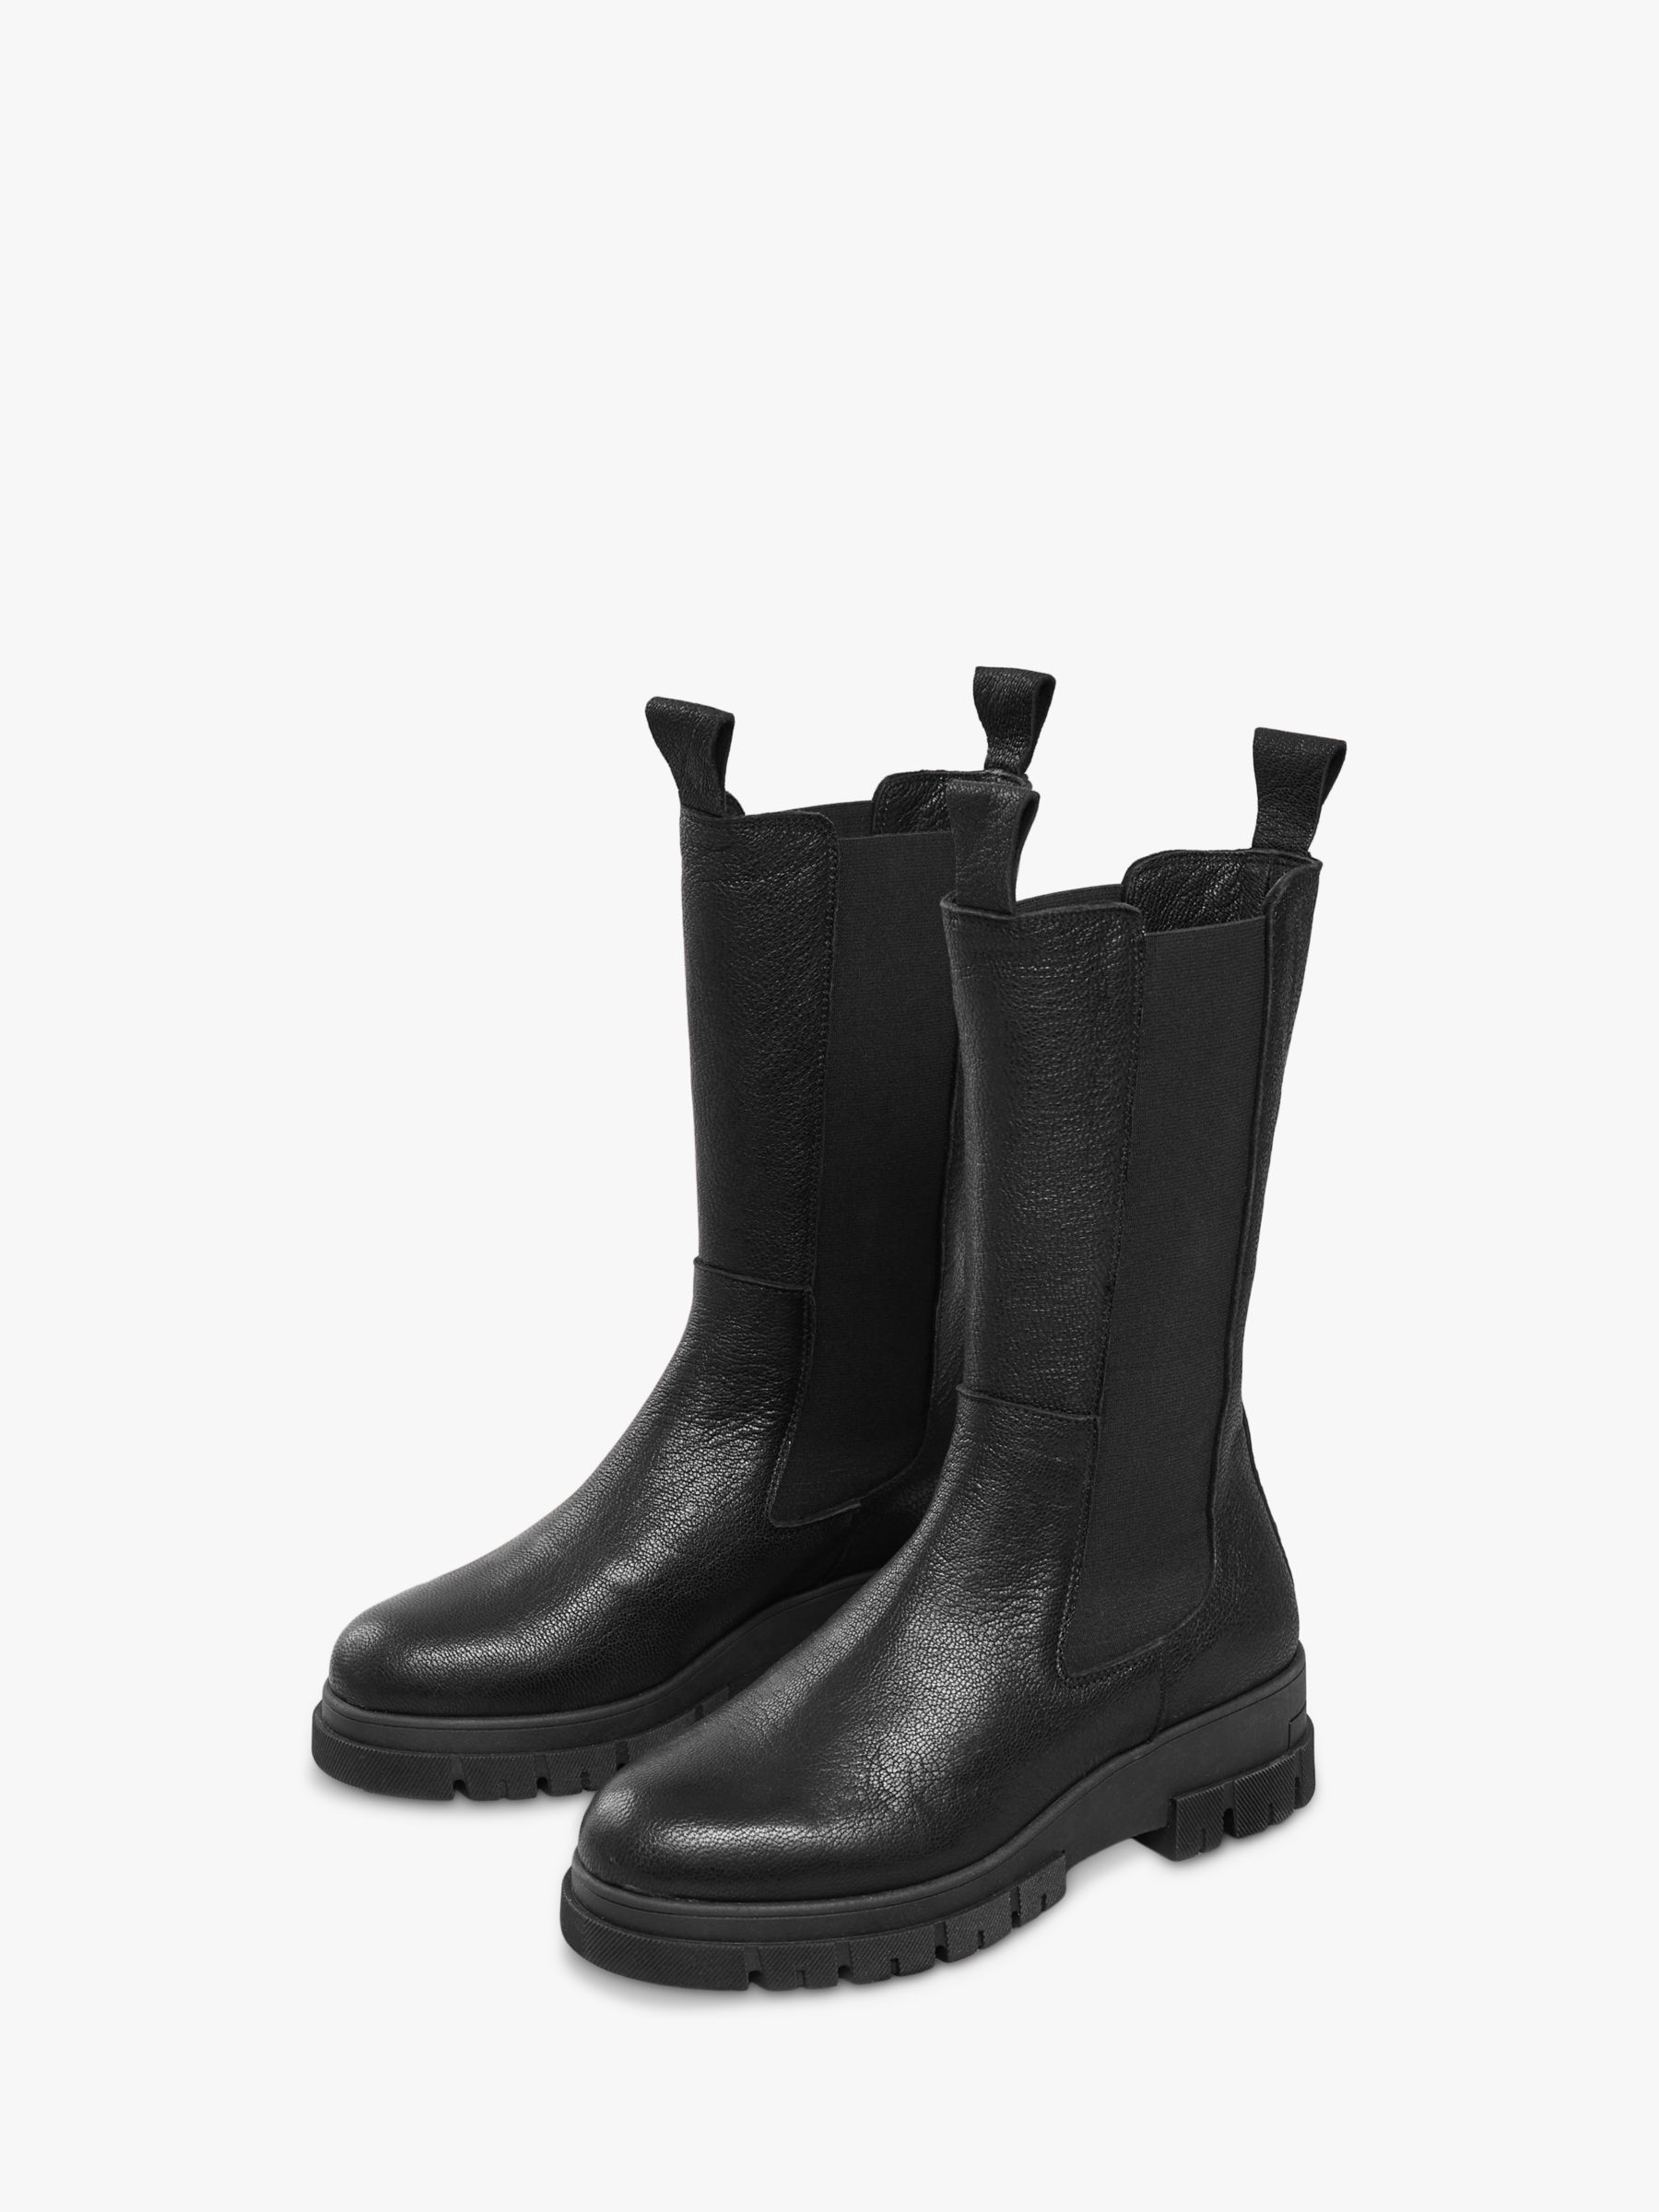 Celtic & Co. Chunky Tall Leather Chelsea Boot, Black, 3